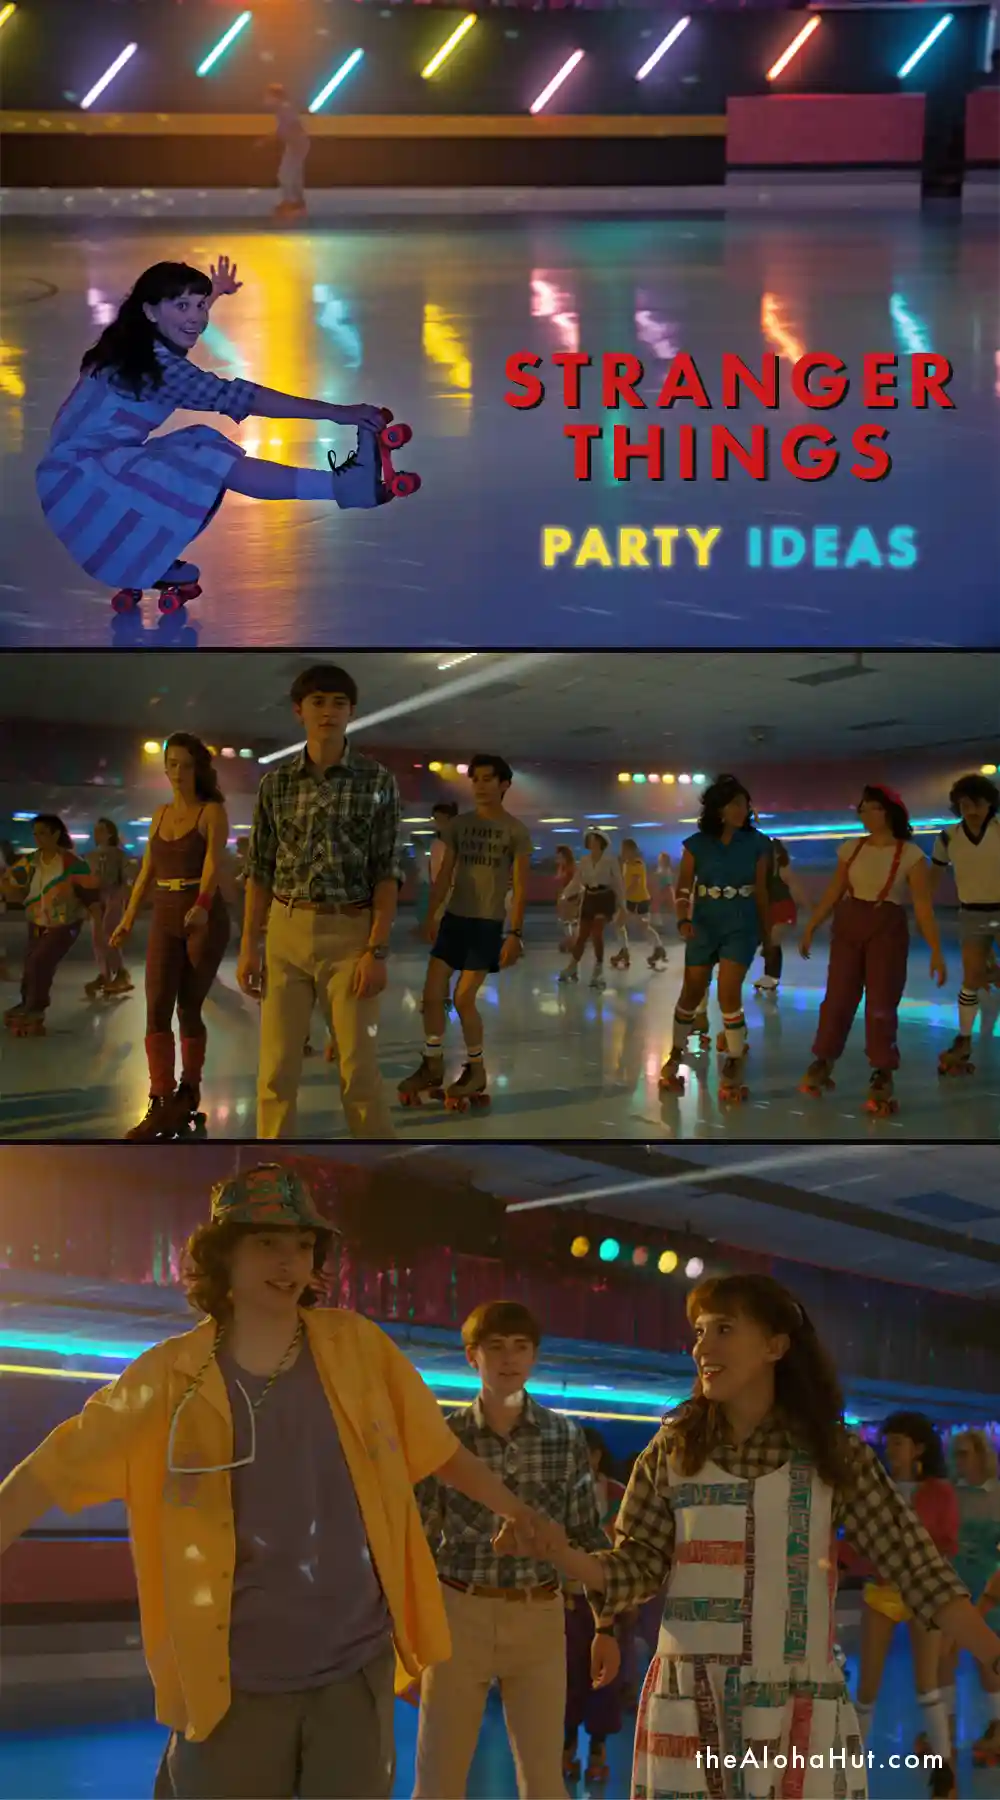 Stranger Things Party Ideas - roller skating